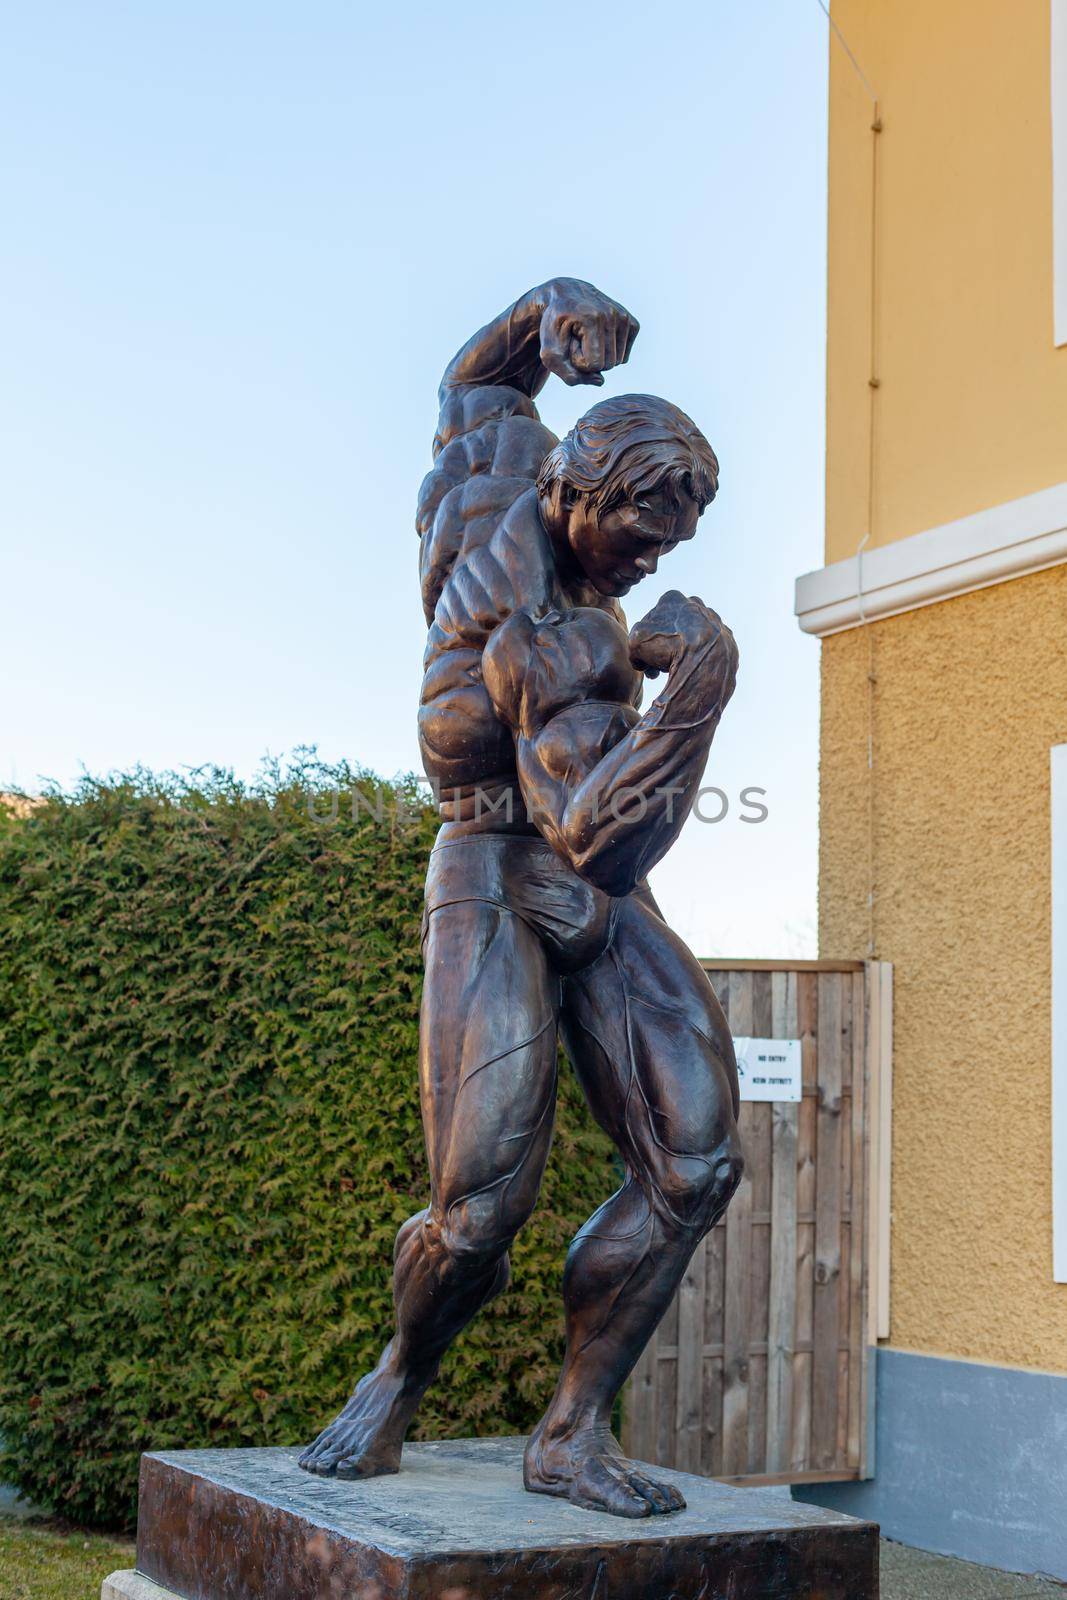 THAL, AUSTRIA - MARCH 6, 2021: Statue of Arnold Schwarzenegger in front of his museum.